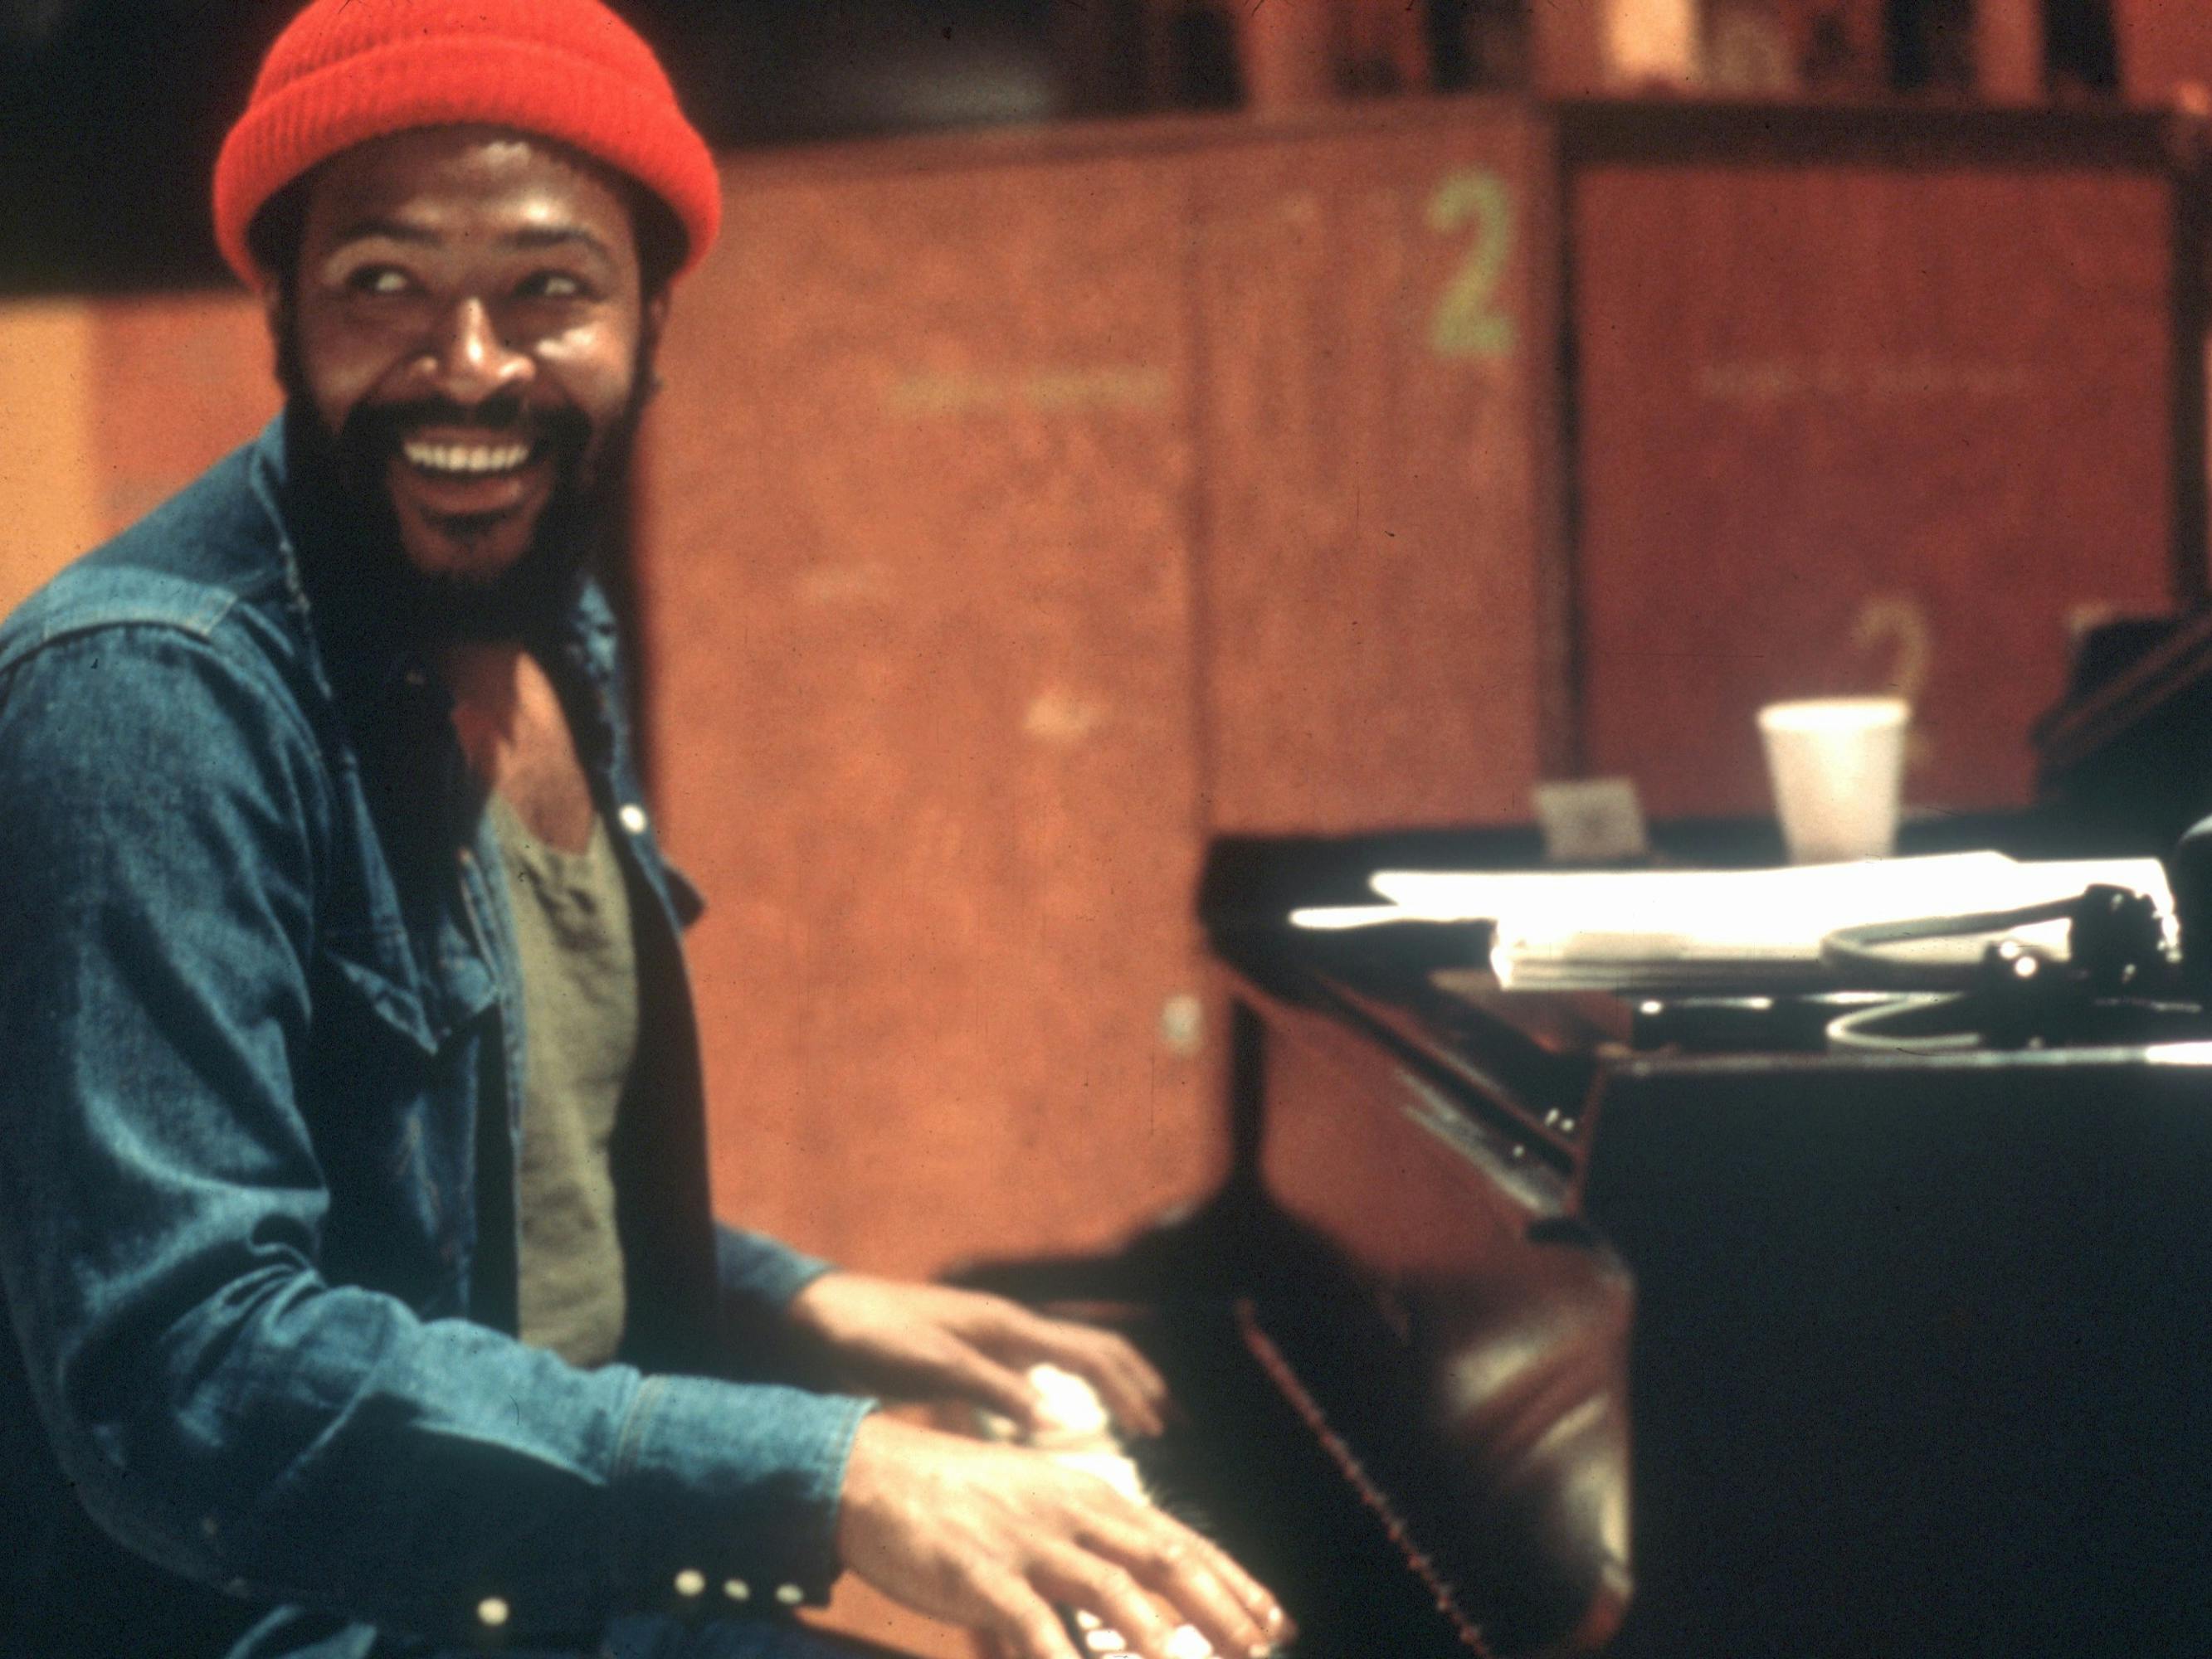 Marvin Gaye at Golden West Studios in 1973 in Los Angeles, California wears a red beanie and jean shirt and plays piano. 